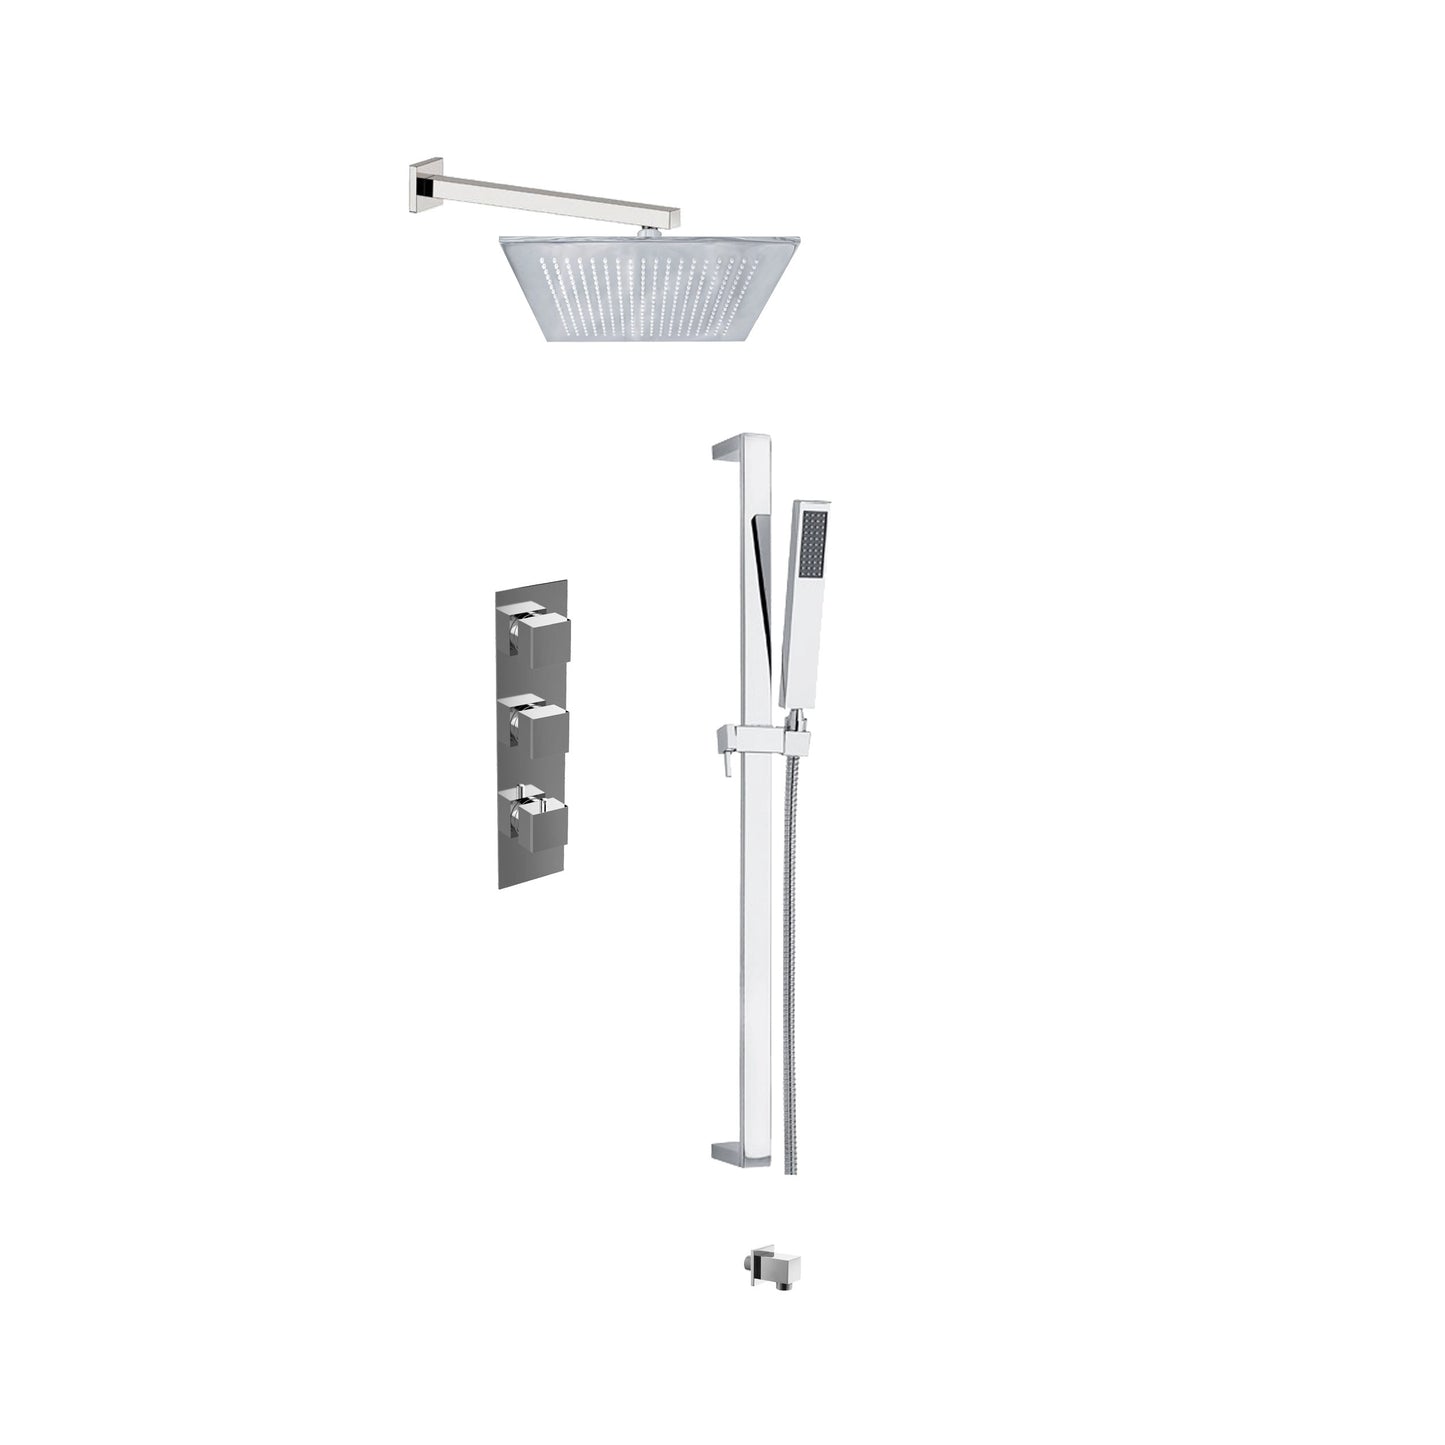 Aquadesign Products Shower Kit (System X17) - Chrome